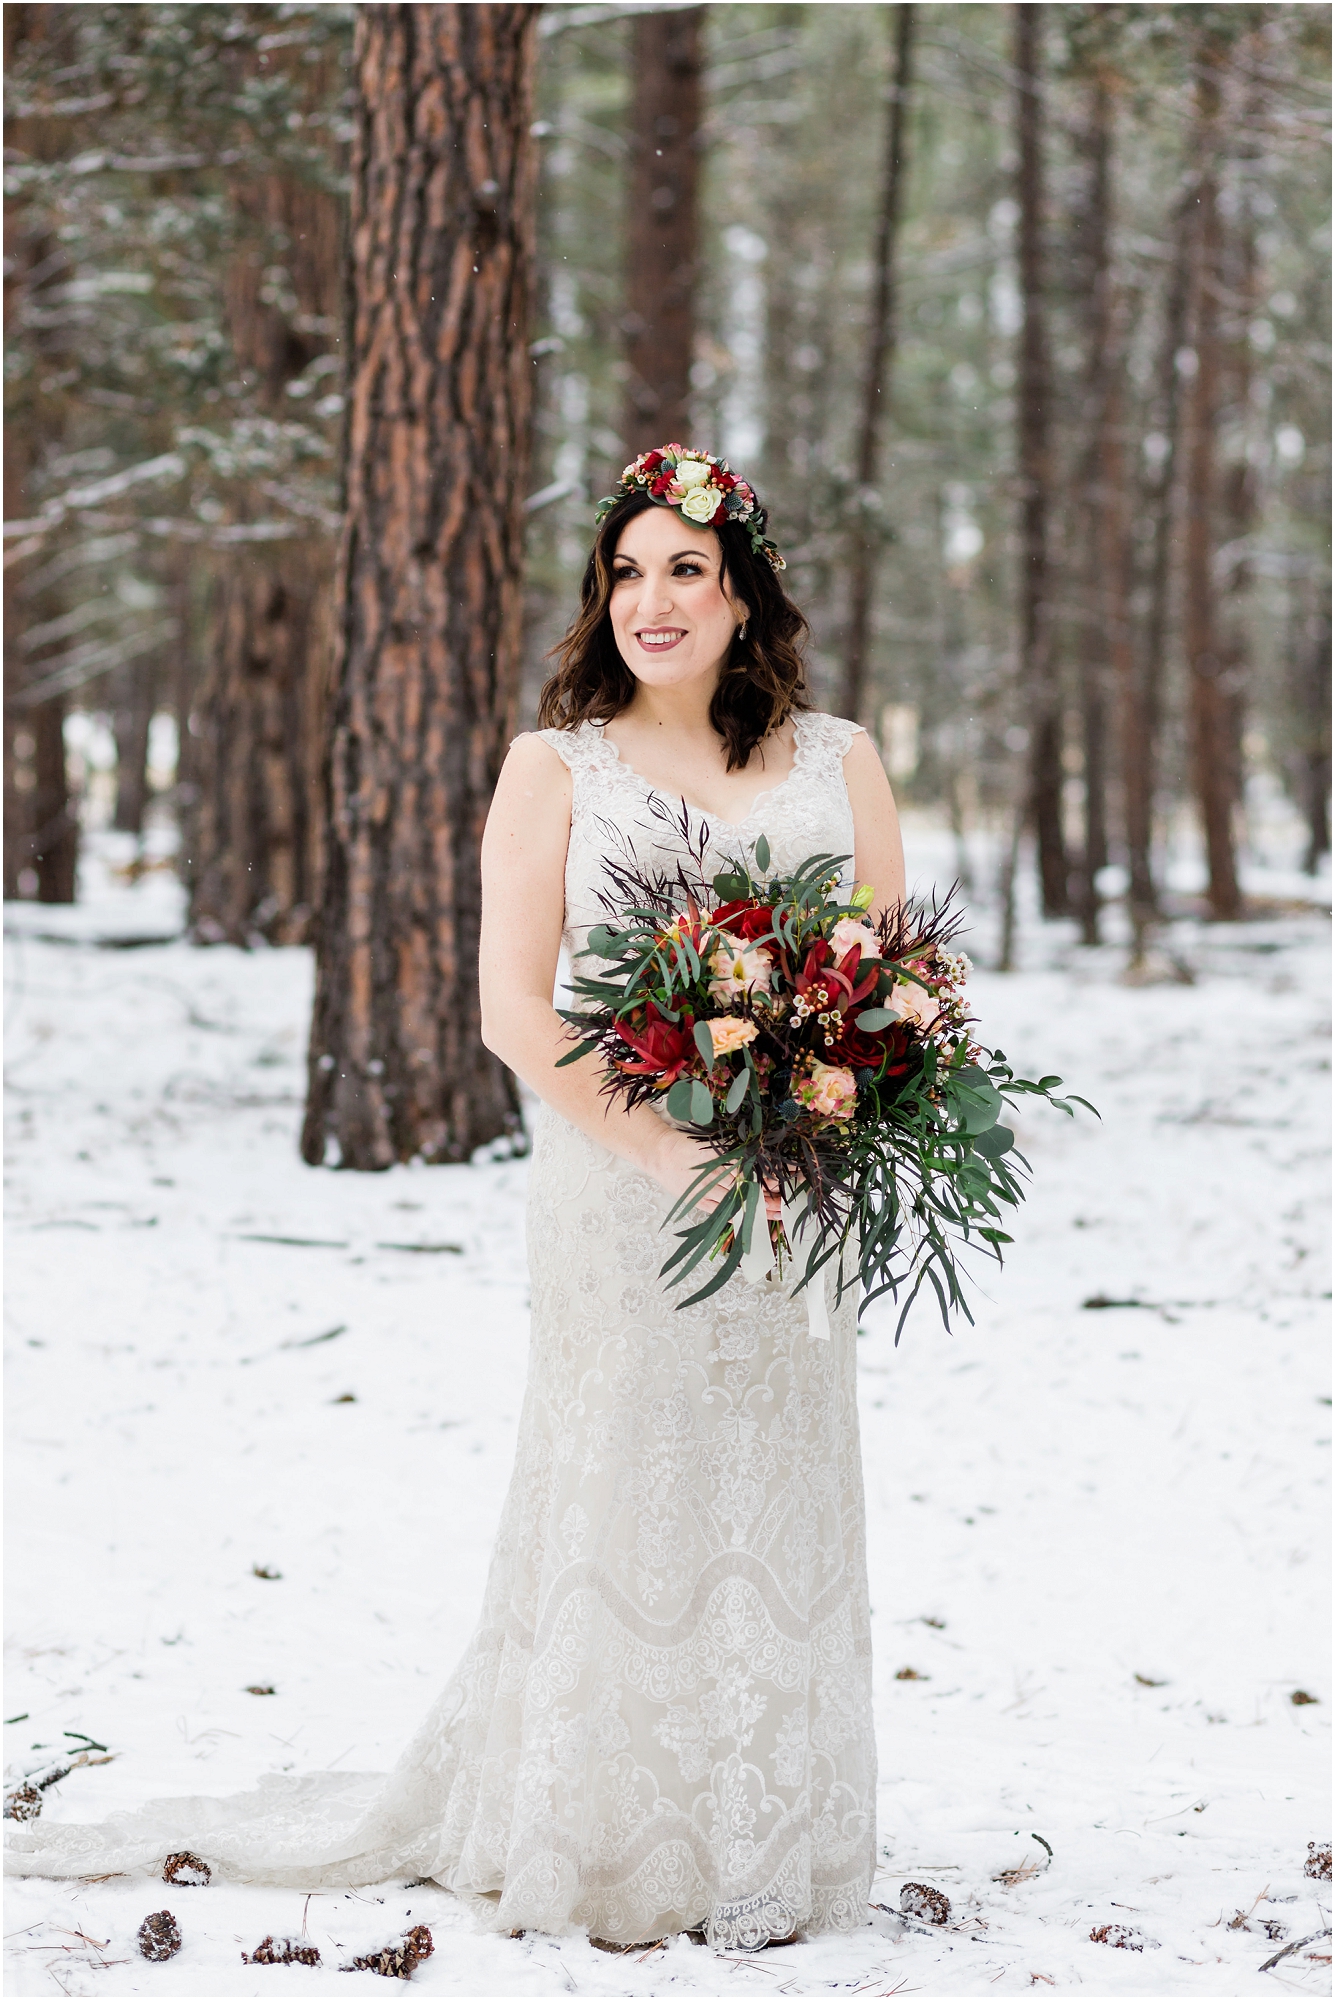 A stunning bride, wearing a white sweetheart neckline lace gown, a floral crown and gorgeous bouquet of red and pink roses and greenery sprays stands in the snow covered pines at her Five Pine Lodge Central Oregon winter elopement in Sisters. | Erica Swantek Photography